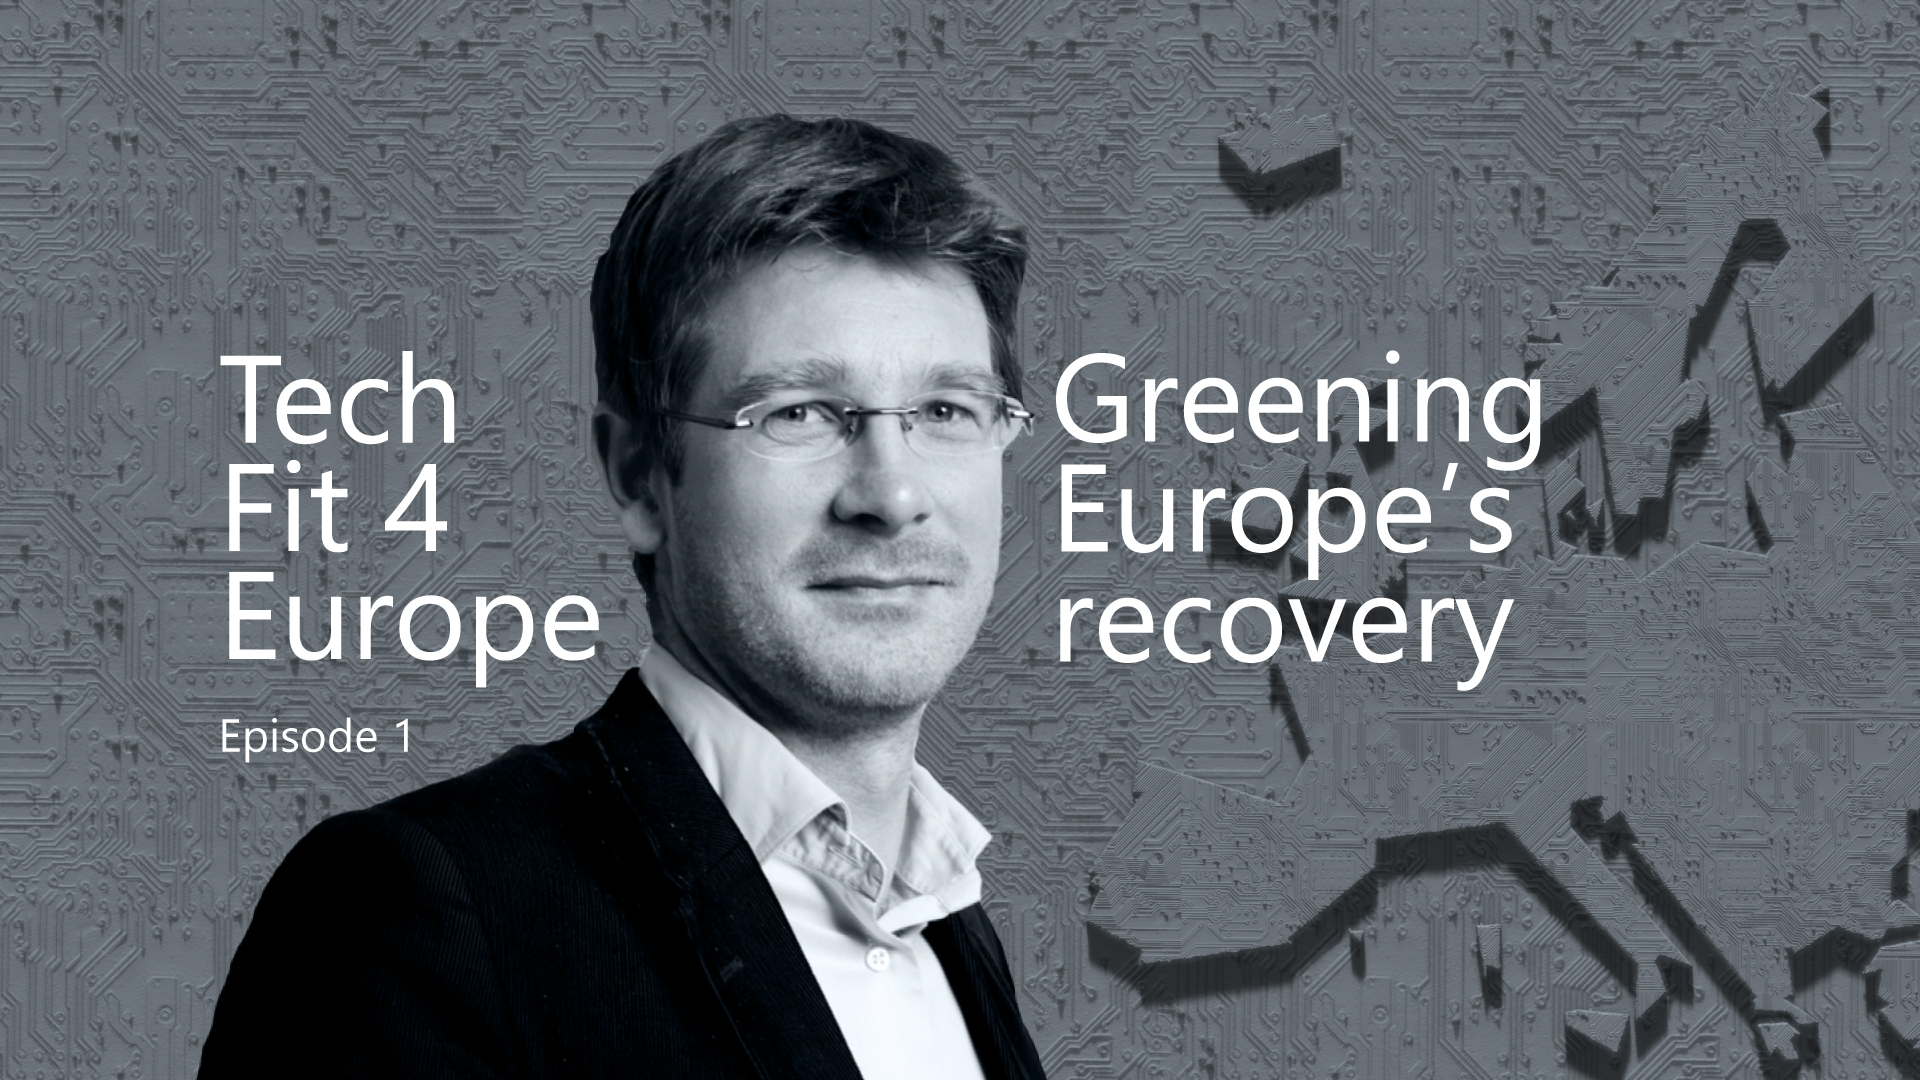 Greening Europe's recovery